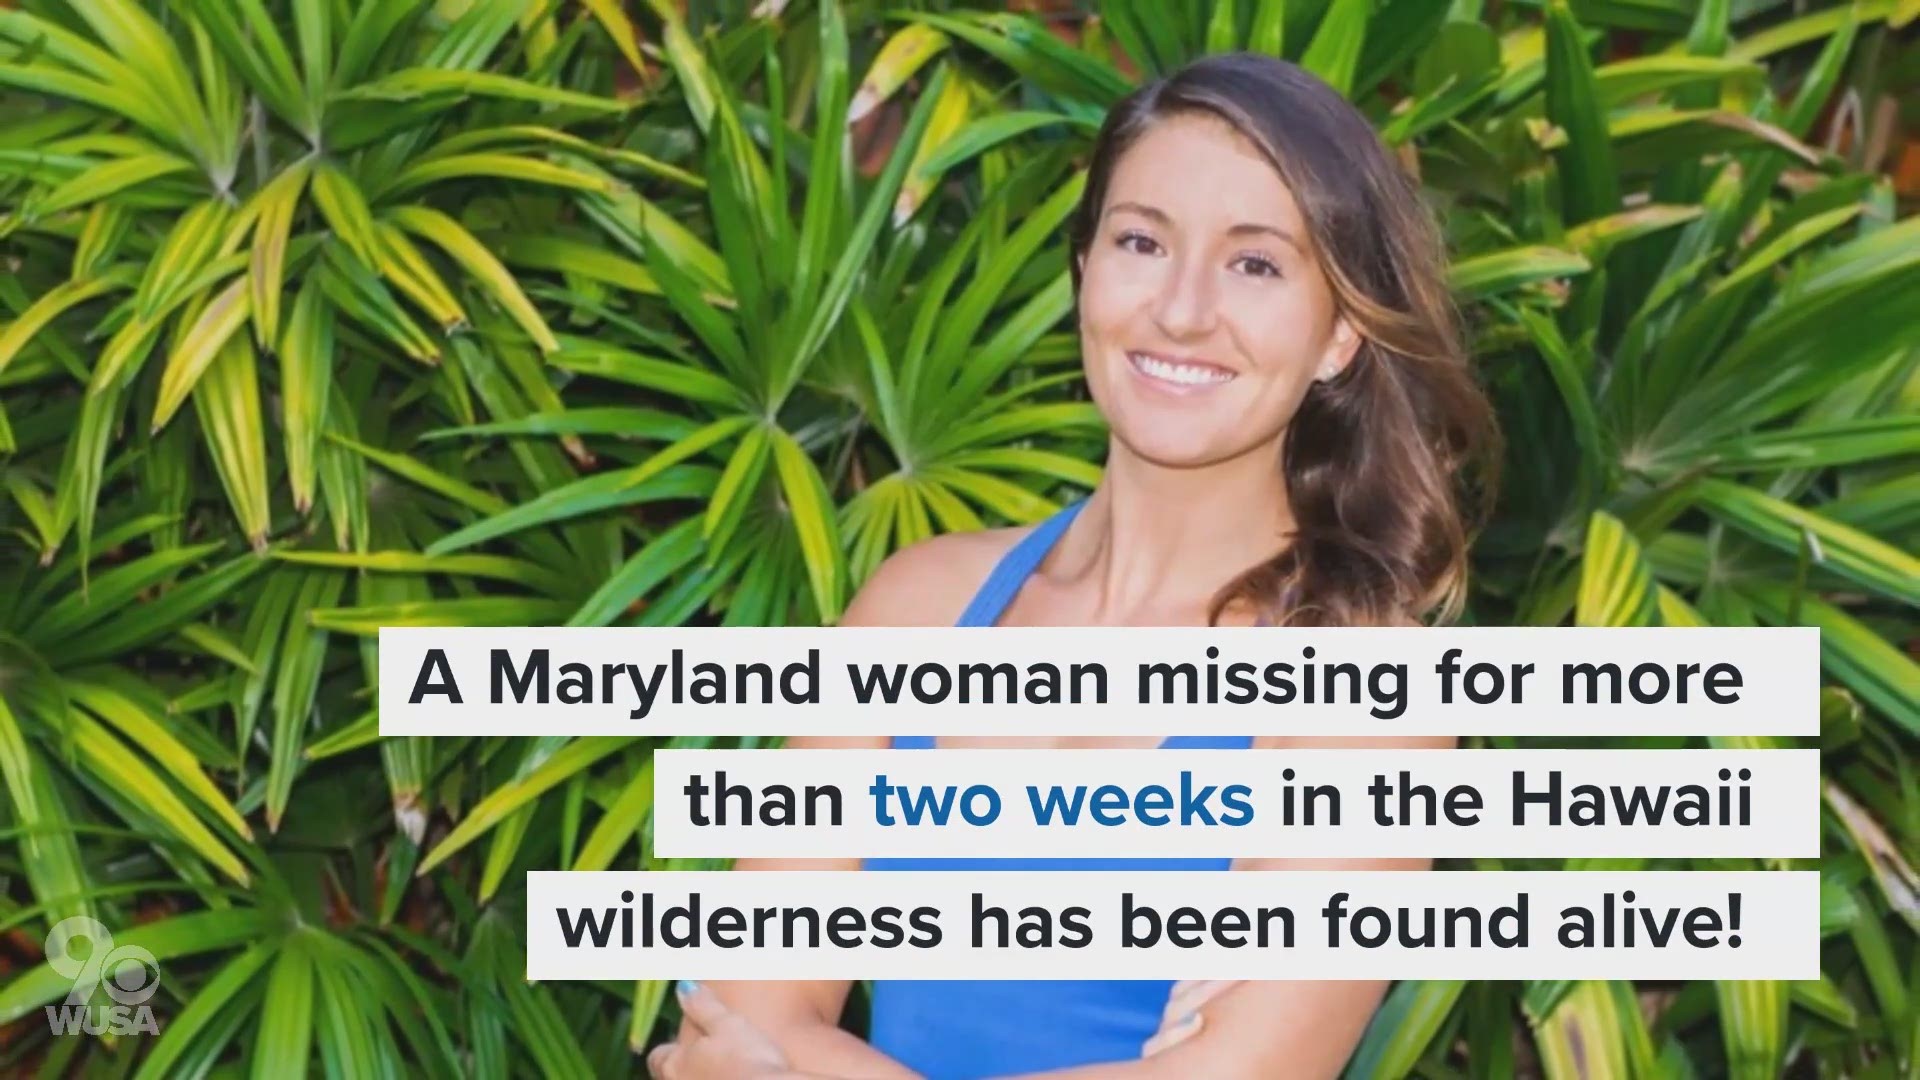 Amanda Eller was reported missing when she didn't come back from a hike more than two weeks ago.